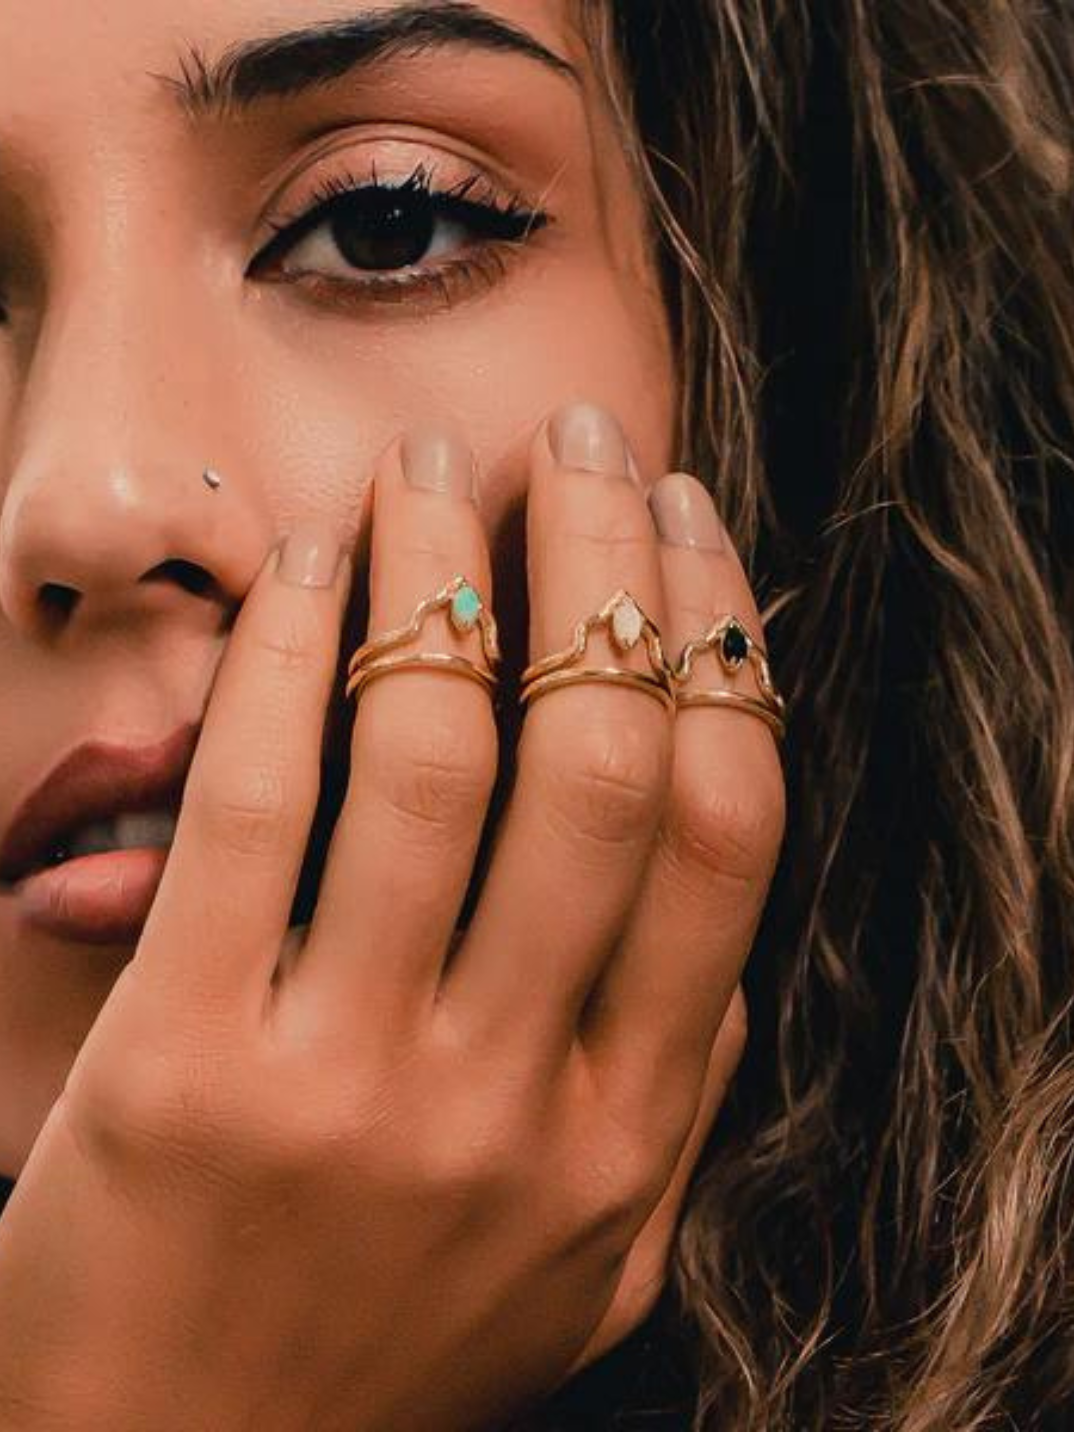 With an adjustable band you can explore many different ways to wear our Obsidian semi precious stone ring made with 18 Karat vermeil gold. It’ll be sure to impress and we can’t wait for you to try it on! Shop now.